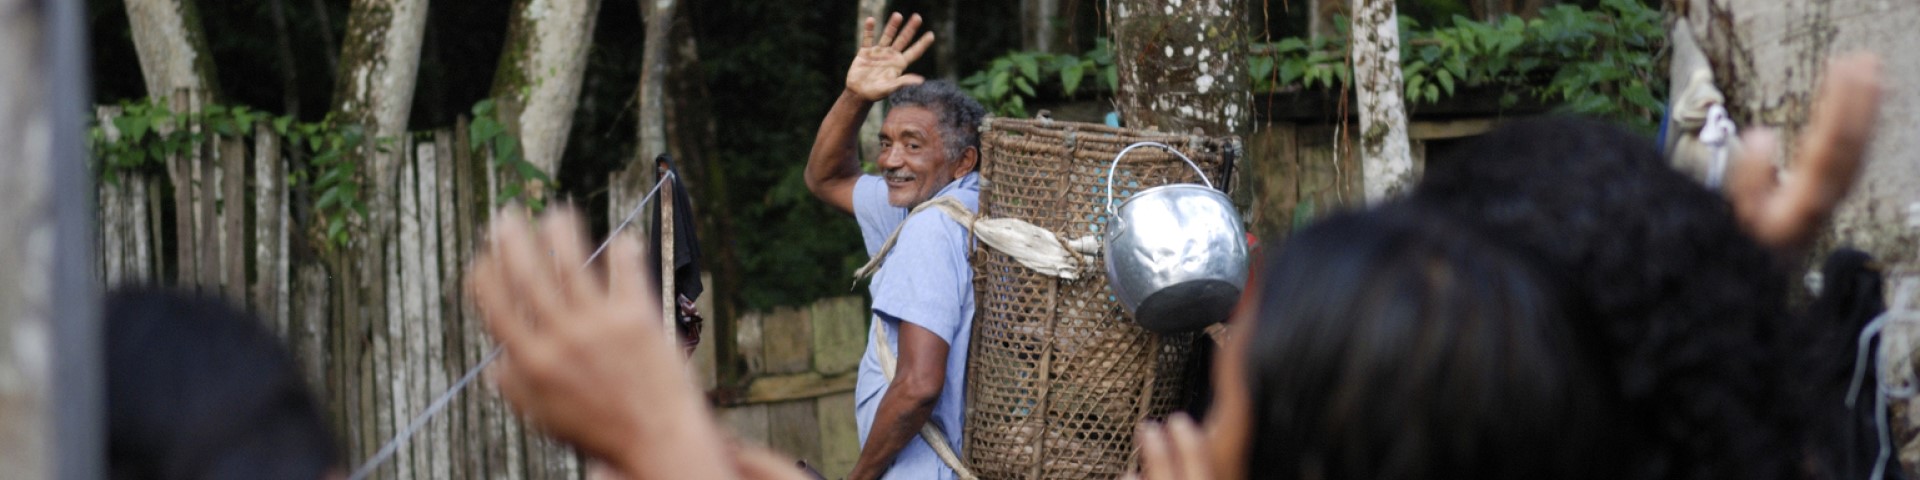 A man carrying a basket on his back stands in front of a forest and waves to a group.